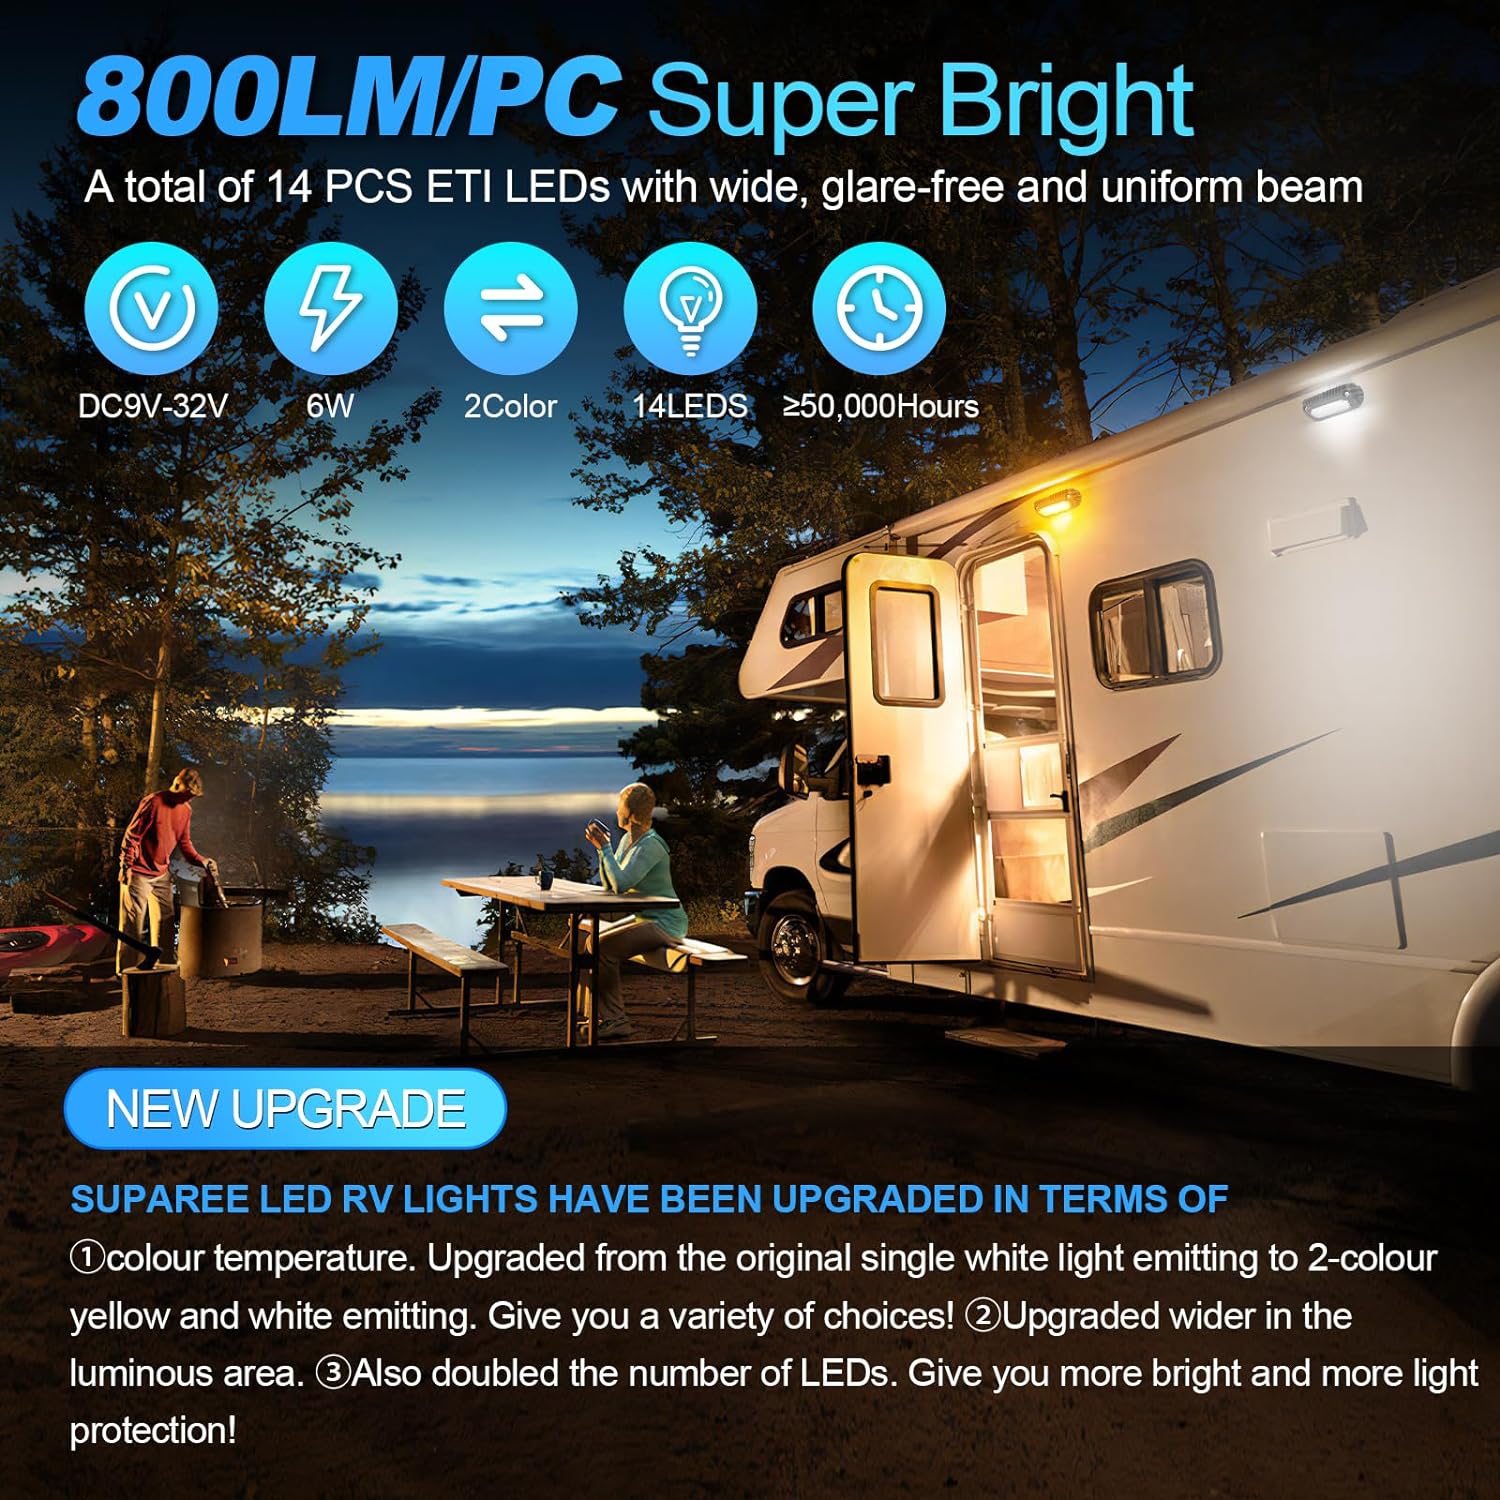 SUPAREE SUPAREE 12V RV LED Porch Light with Aluminum Base Kit for RVs Trailers Campers Product description